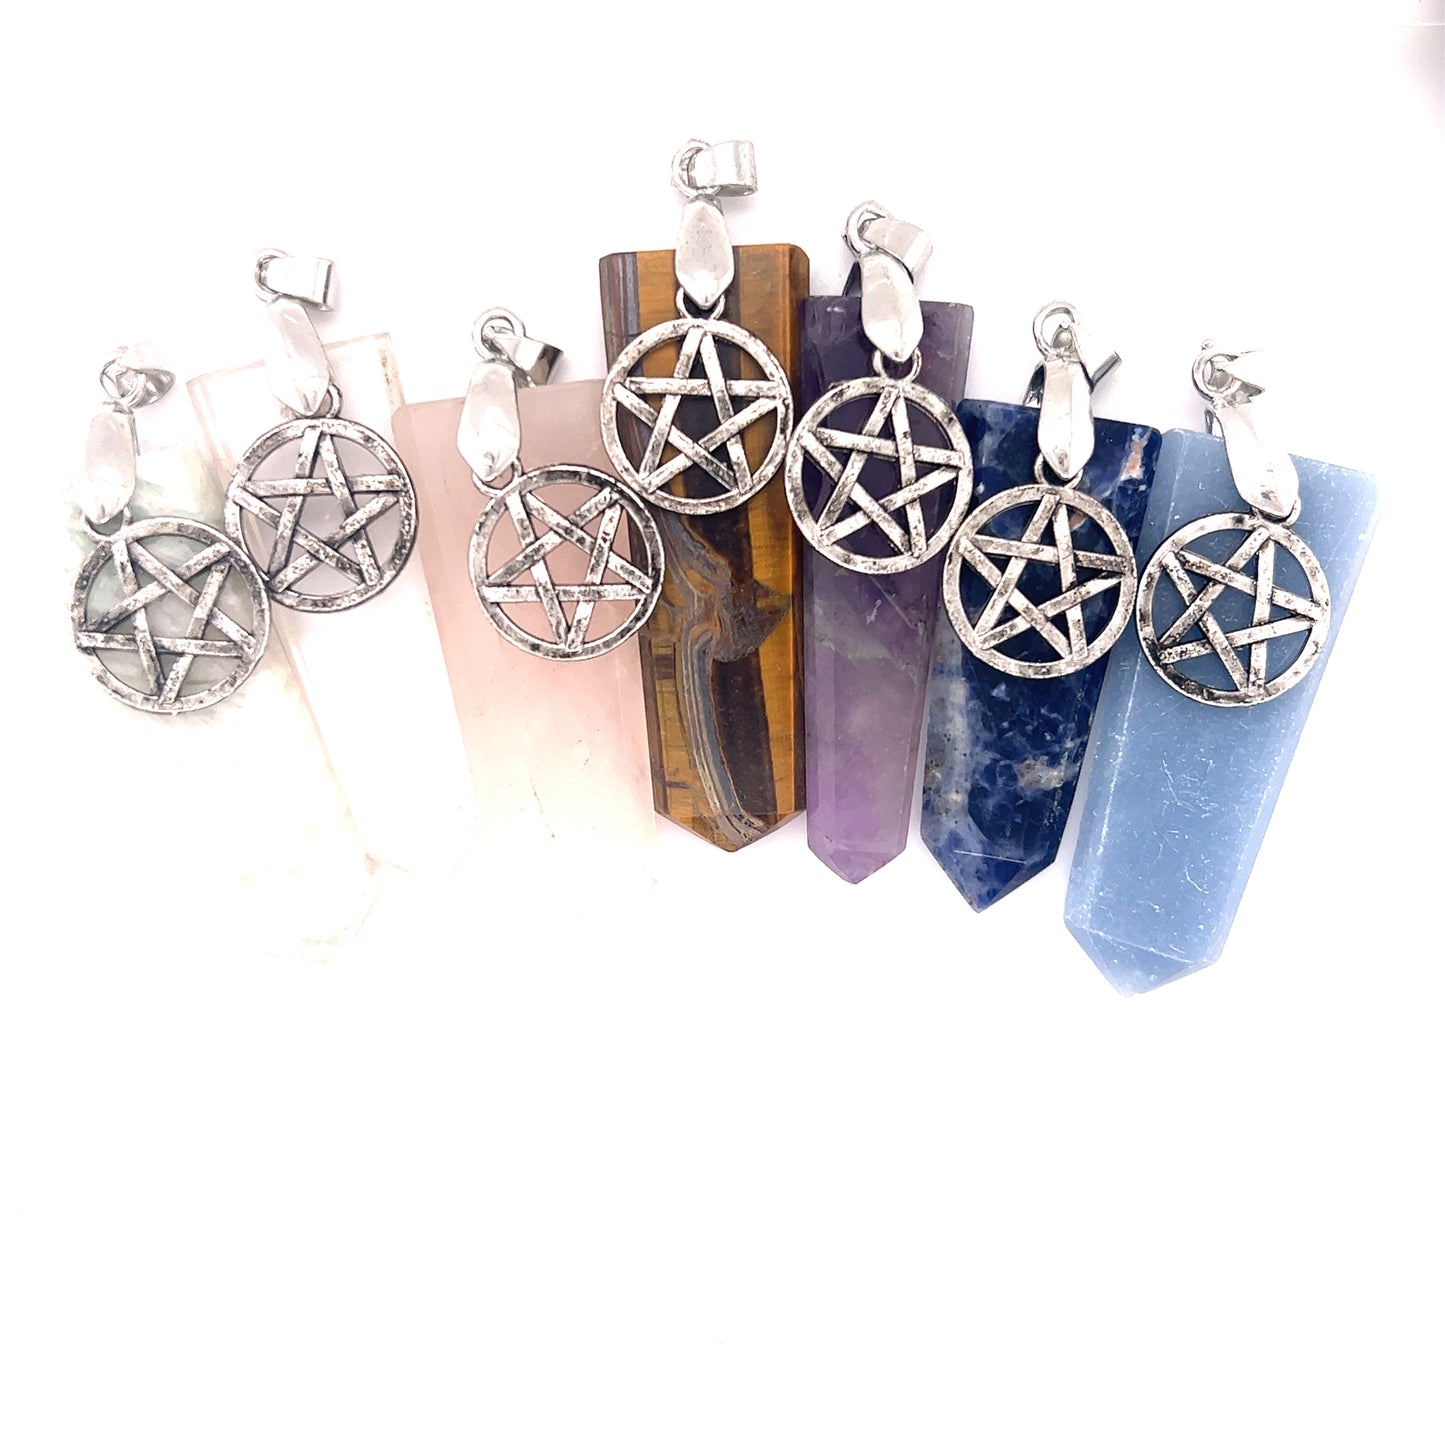 Four Super Silver Pentagram Stone Slab Pendants featuring a variety of stones on a white background.